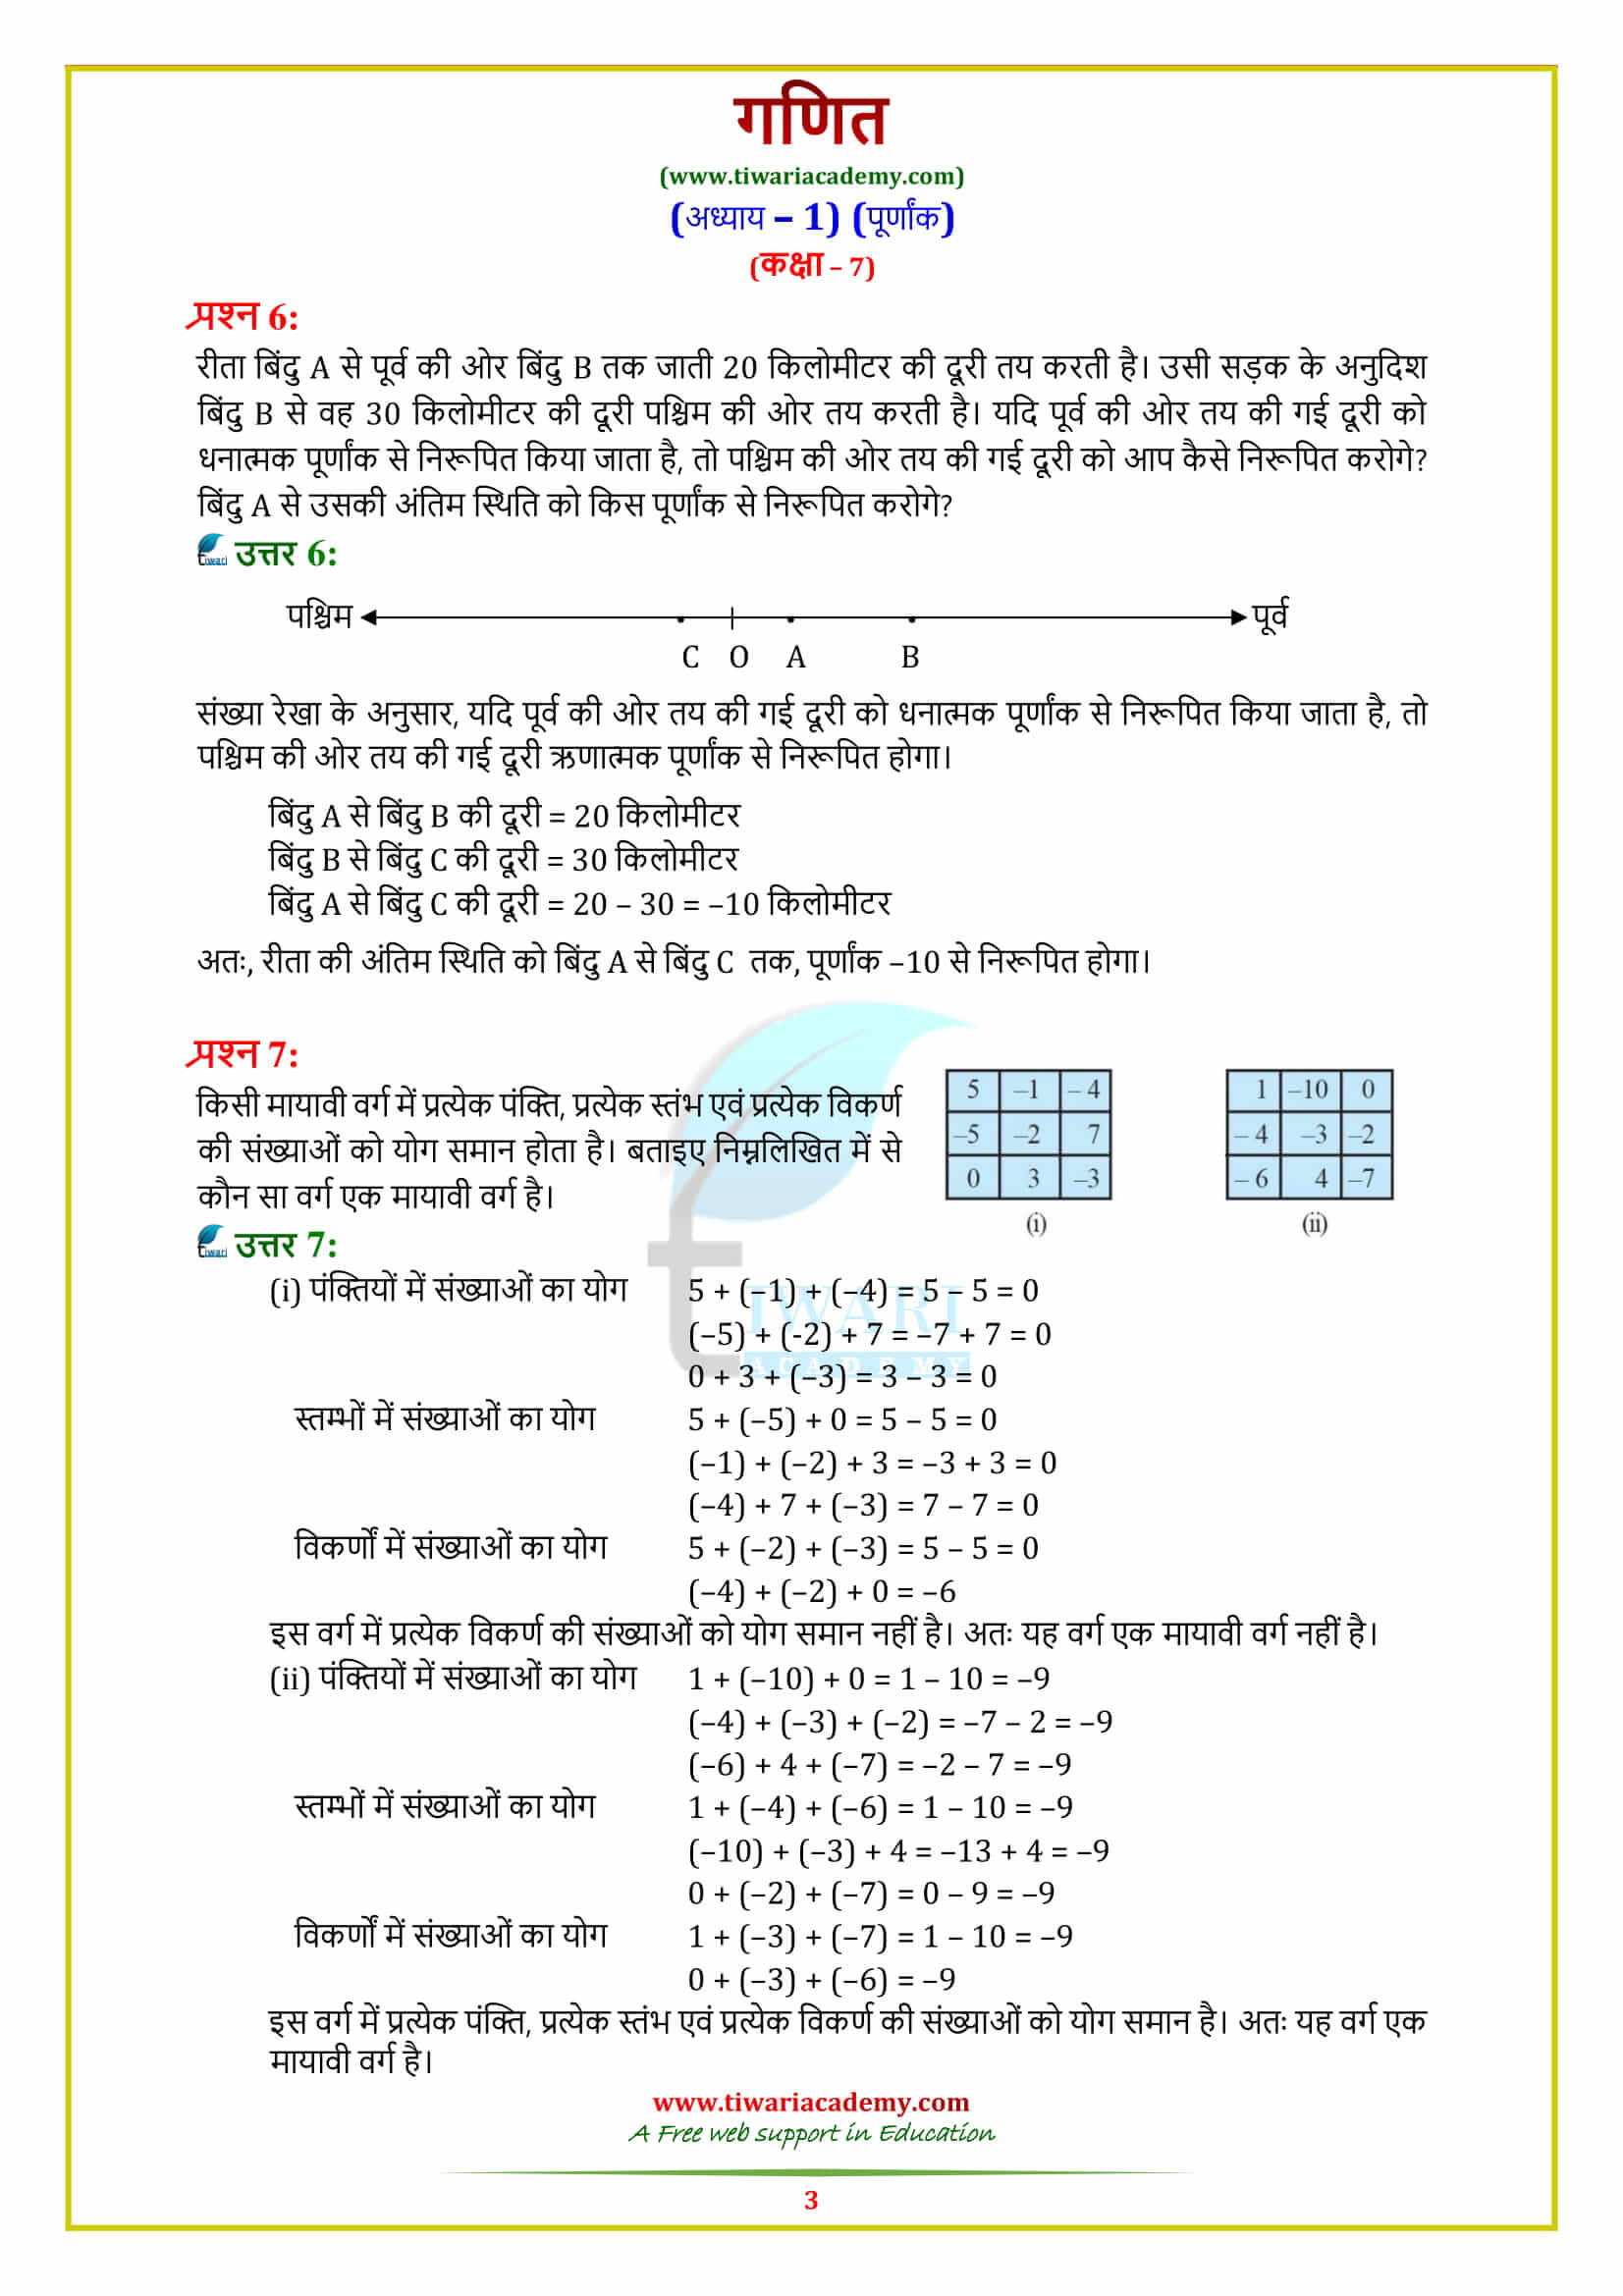 7 Maths exercise 1.1 solutions in hindi